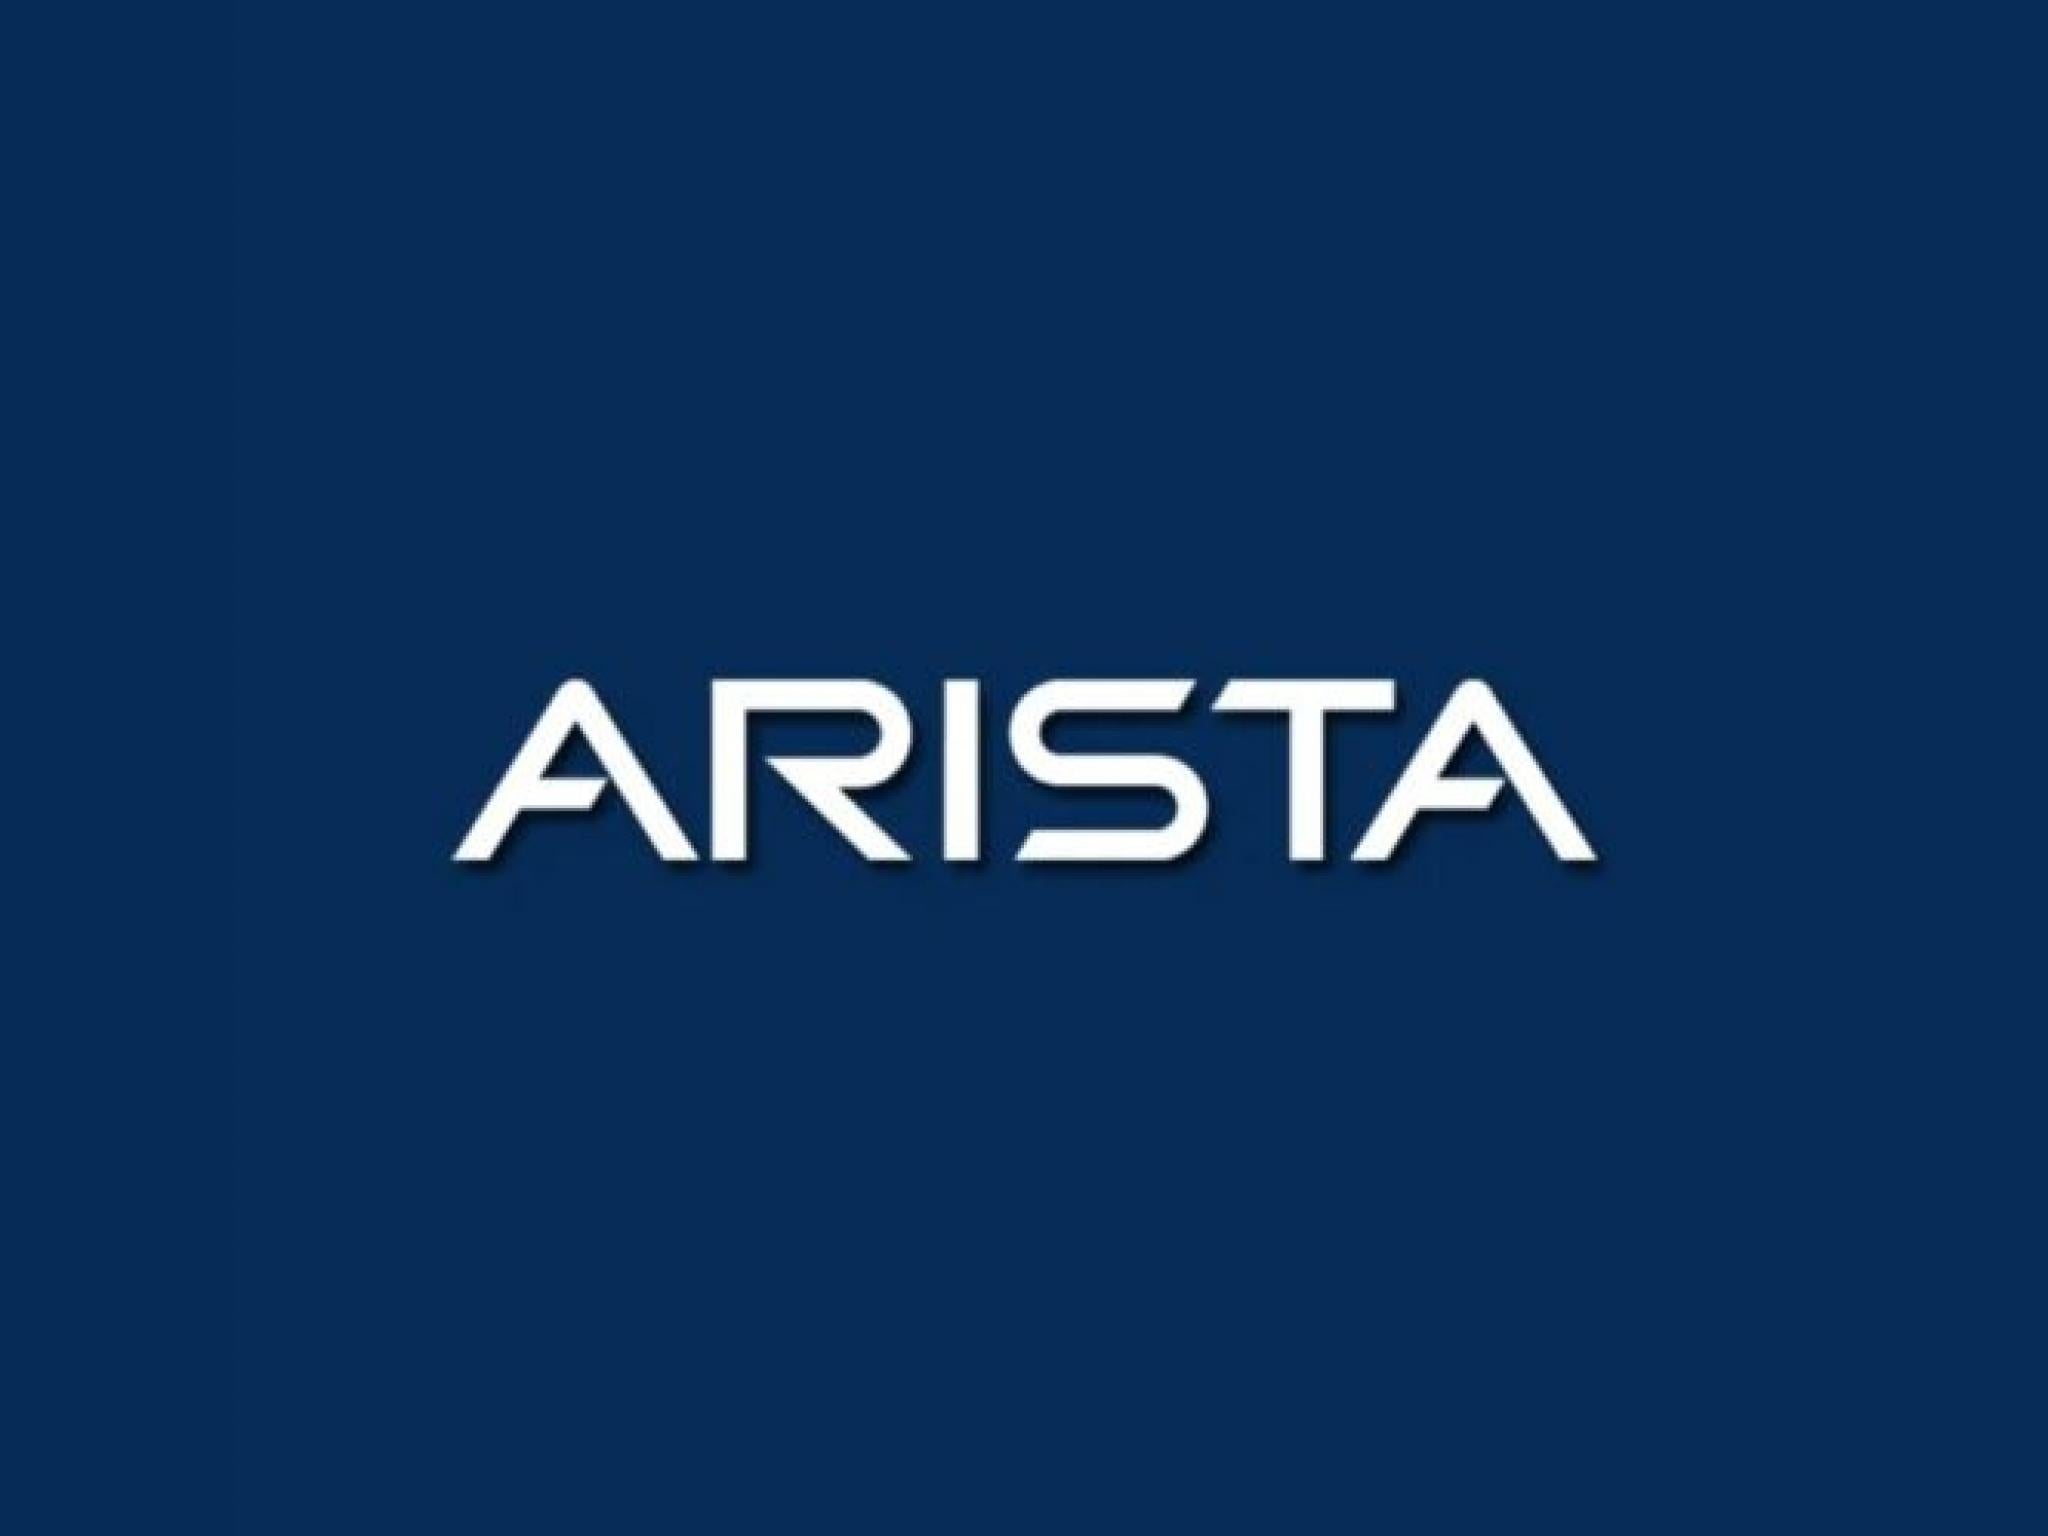  arista-networks-stock-climbs-after-strong-q1-earnings-upbeat-guidance 